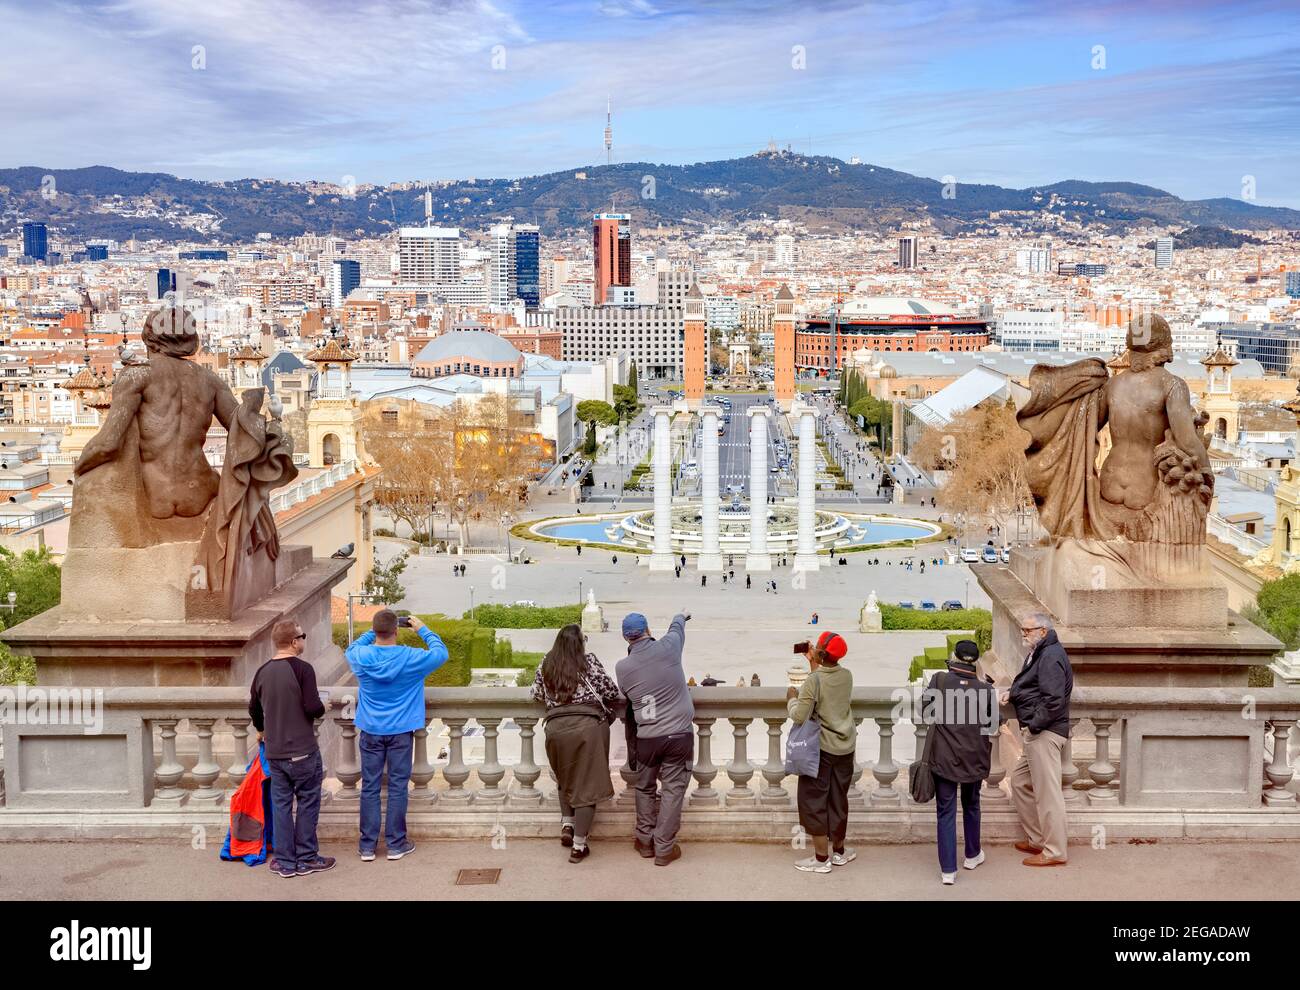 4 March 2020: Barcelona, Spain - Visitors looking over Barcelona from the National Art Museum of Catalonia towards Plaça d'Espanya and Mount Tibidabo. Stock Photo